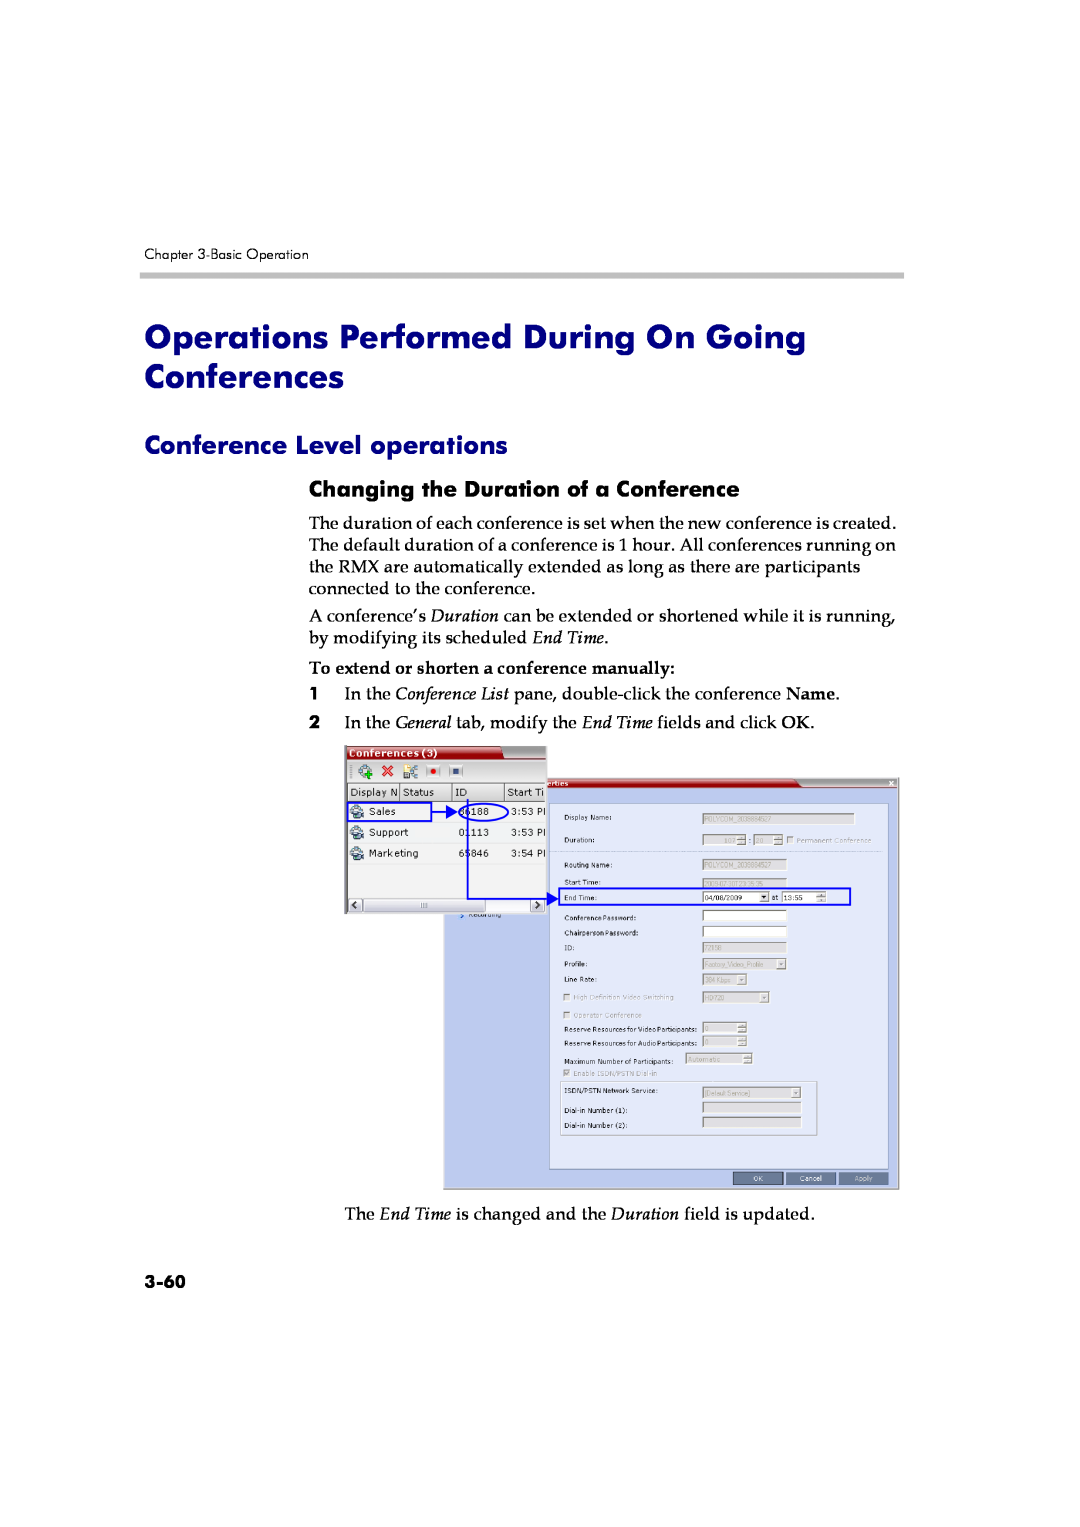 Polycom DOC2560B manual Operations Performed During On Going Conferences, Conference Level operations, 3-60 